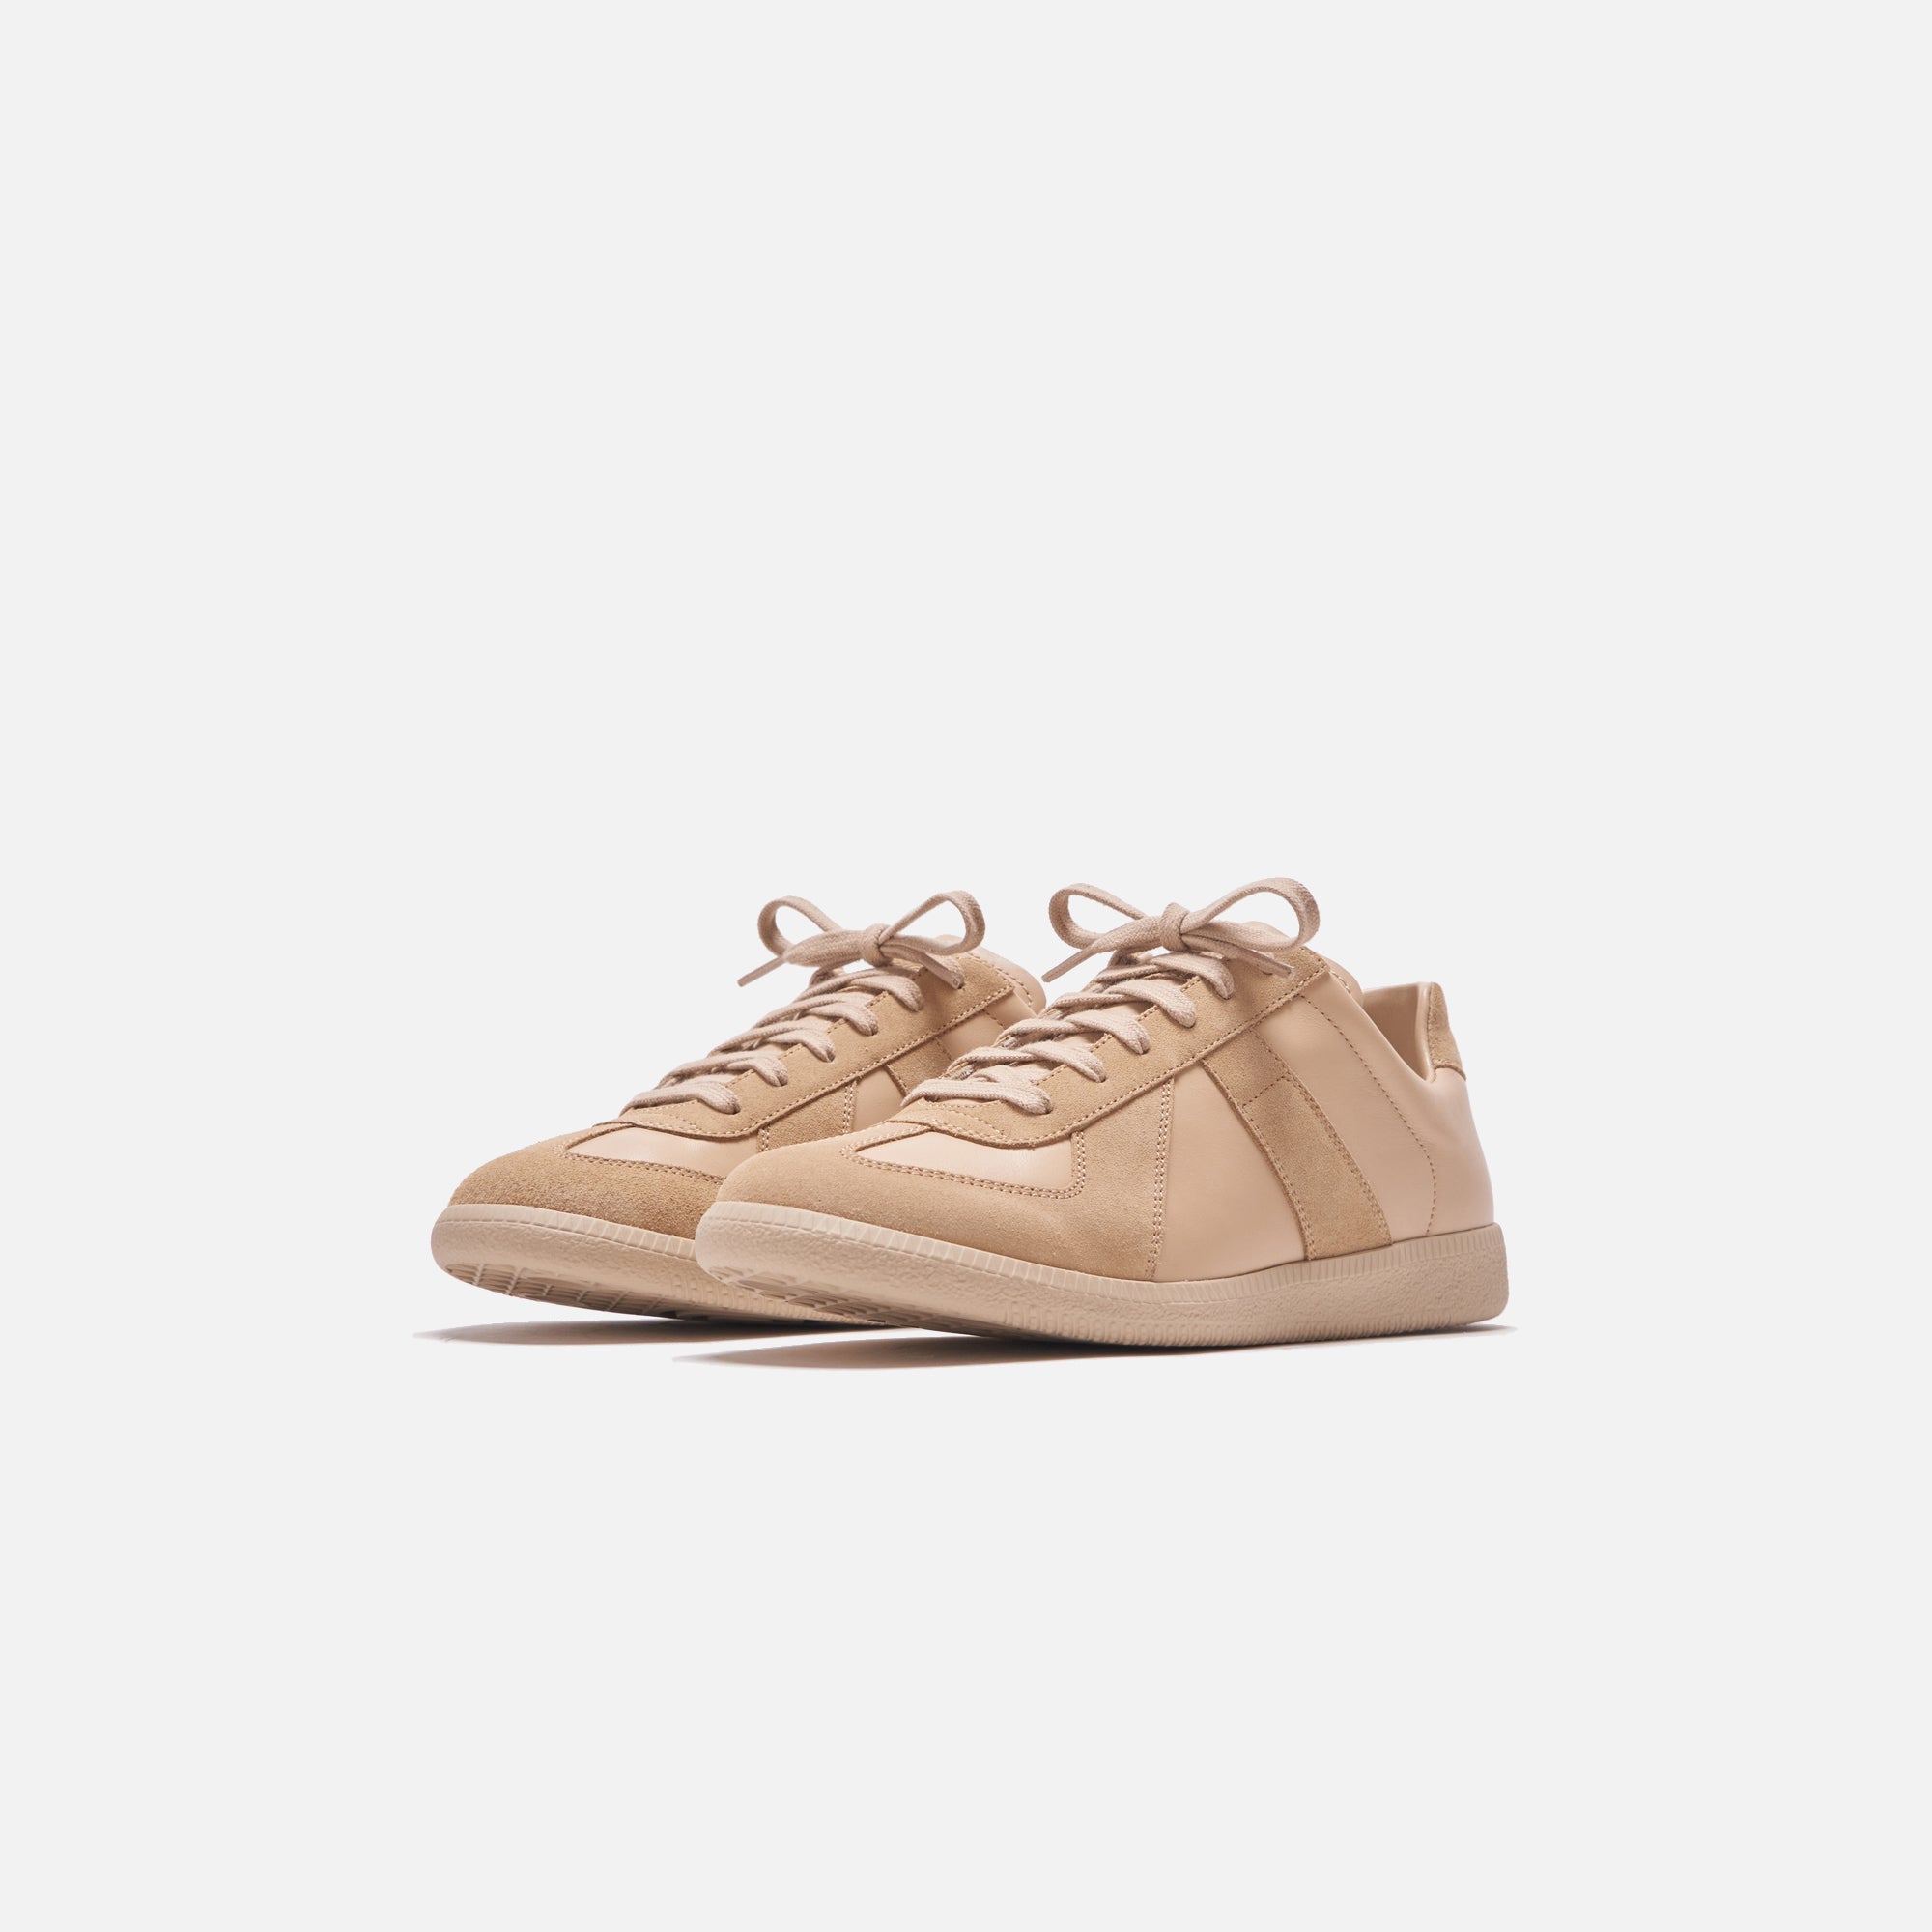 Maison Margiela Replica Low Top - Oyster – Kith